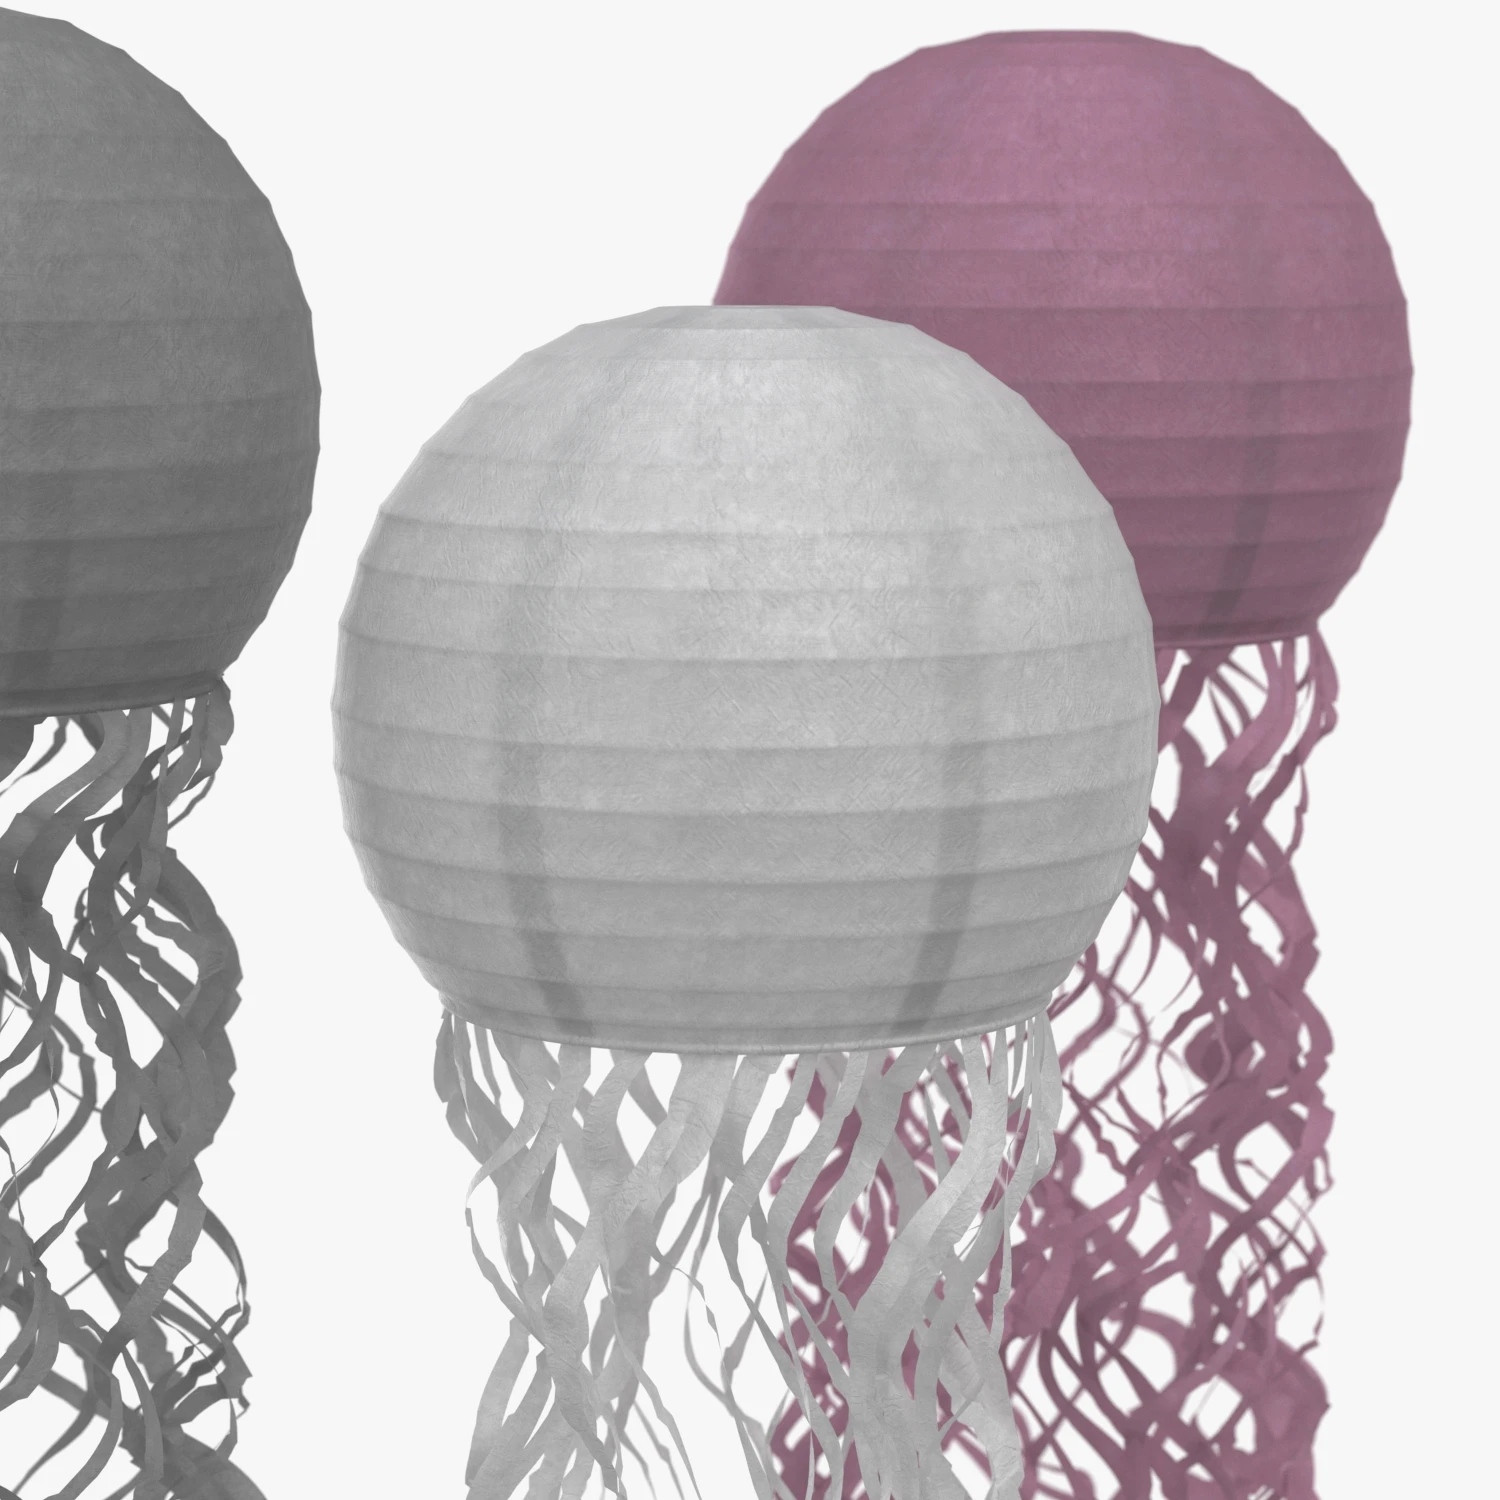 Jellyfish Paper Lanterns 3 Pack Pink White and Gray 3D Model_05